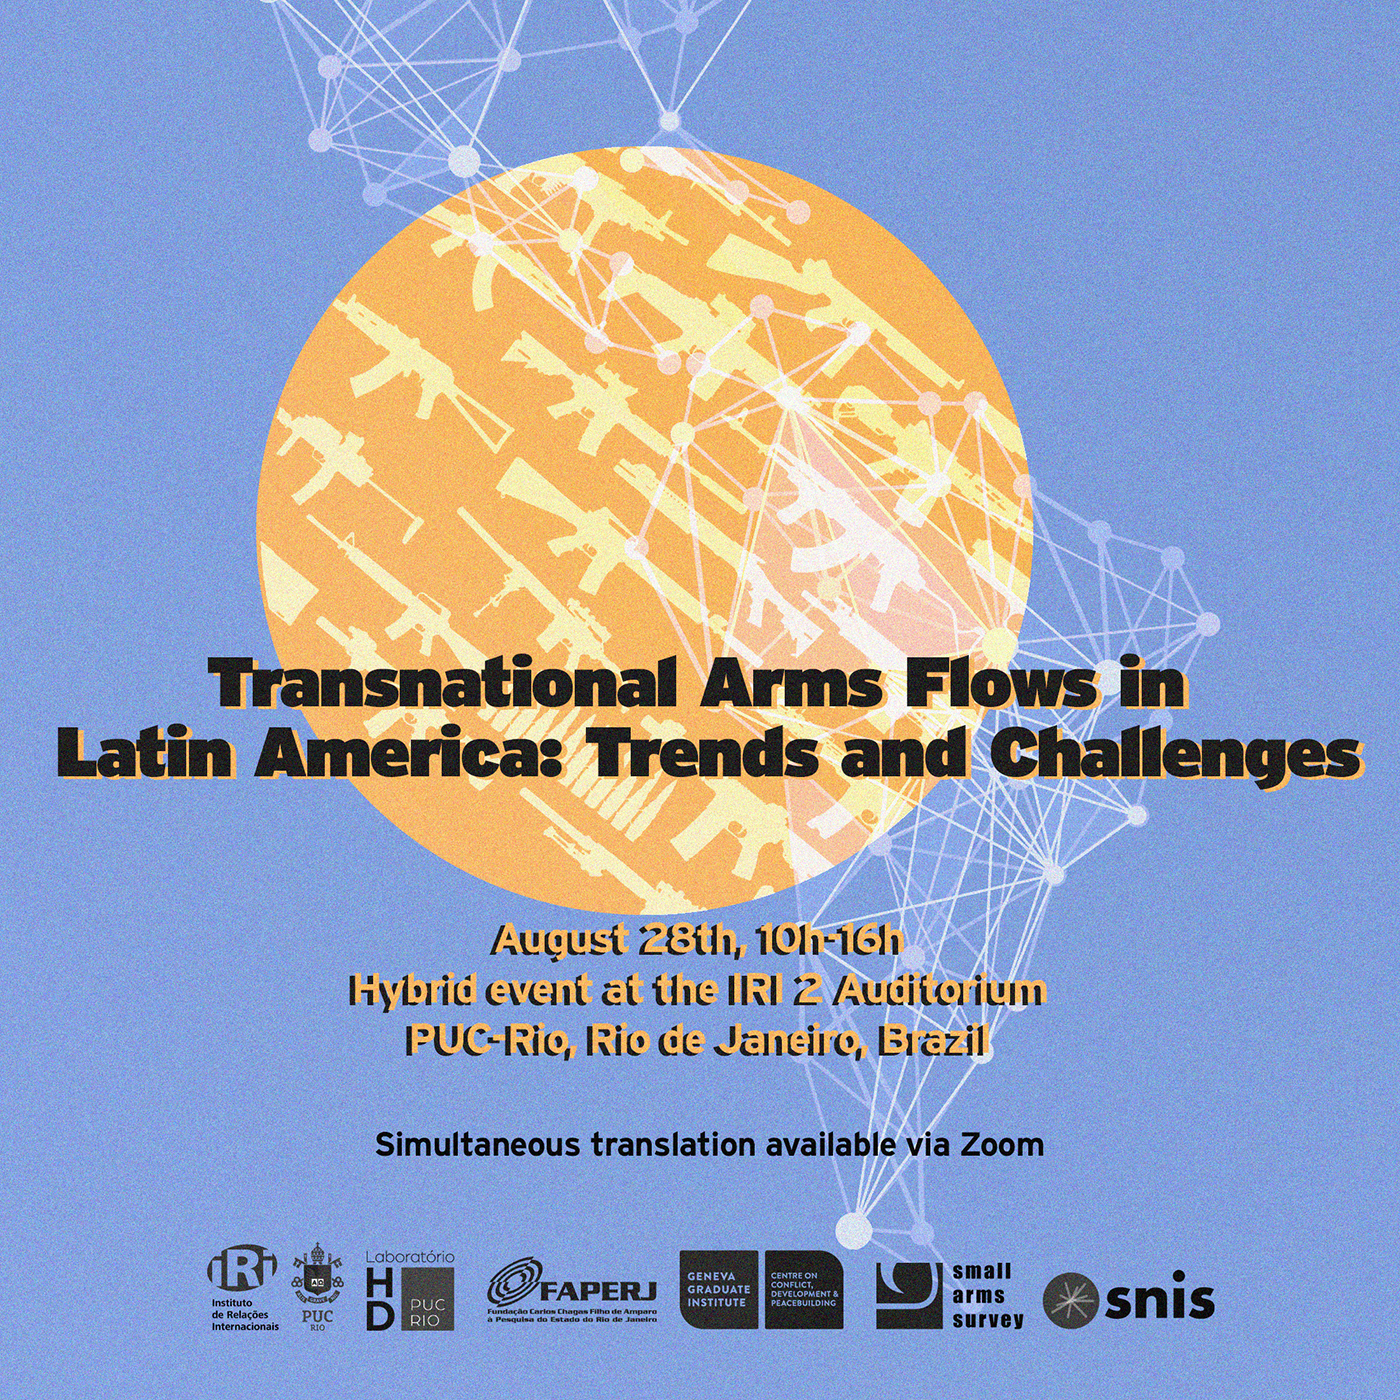 Transnational Arms Flows in Latin America: Trends and Challenges